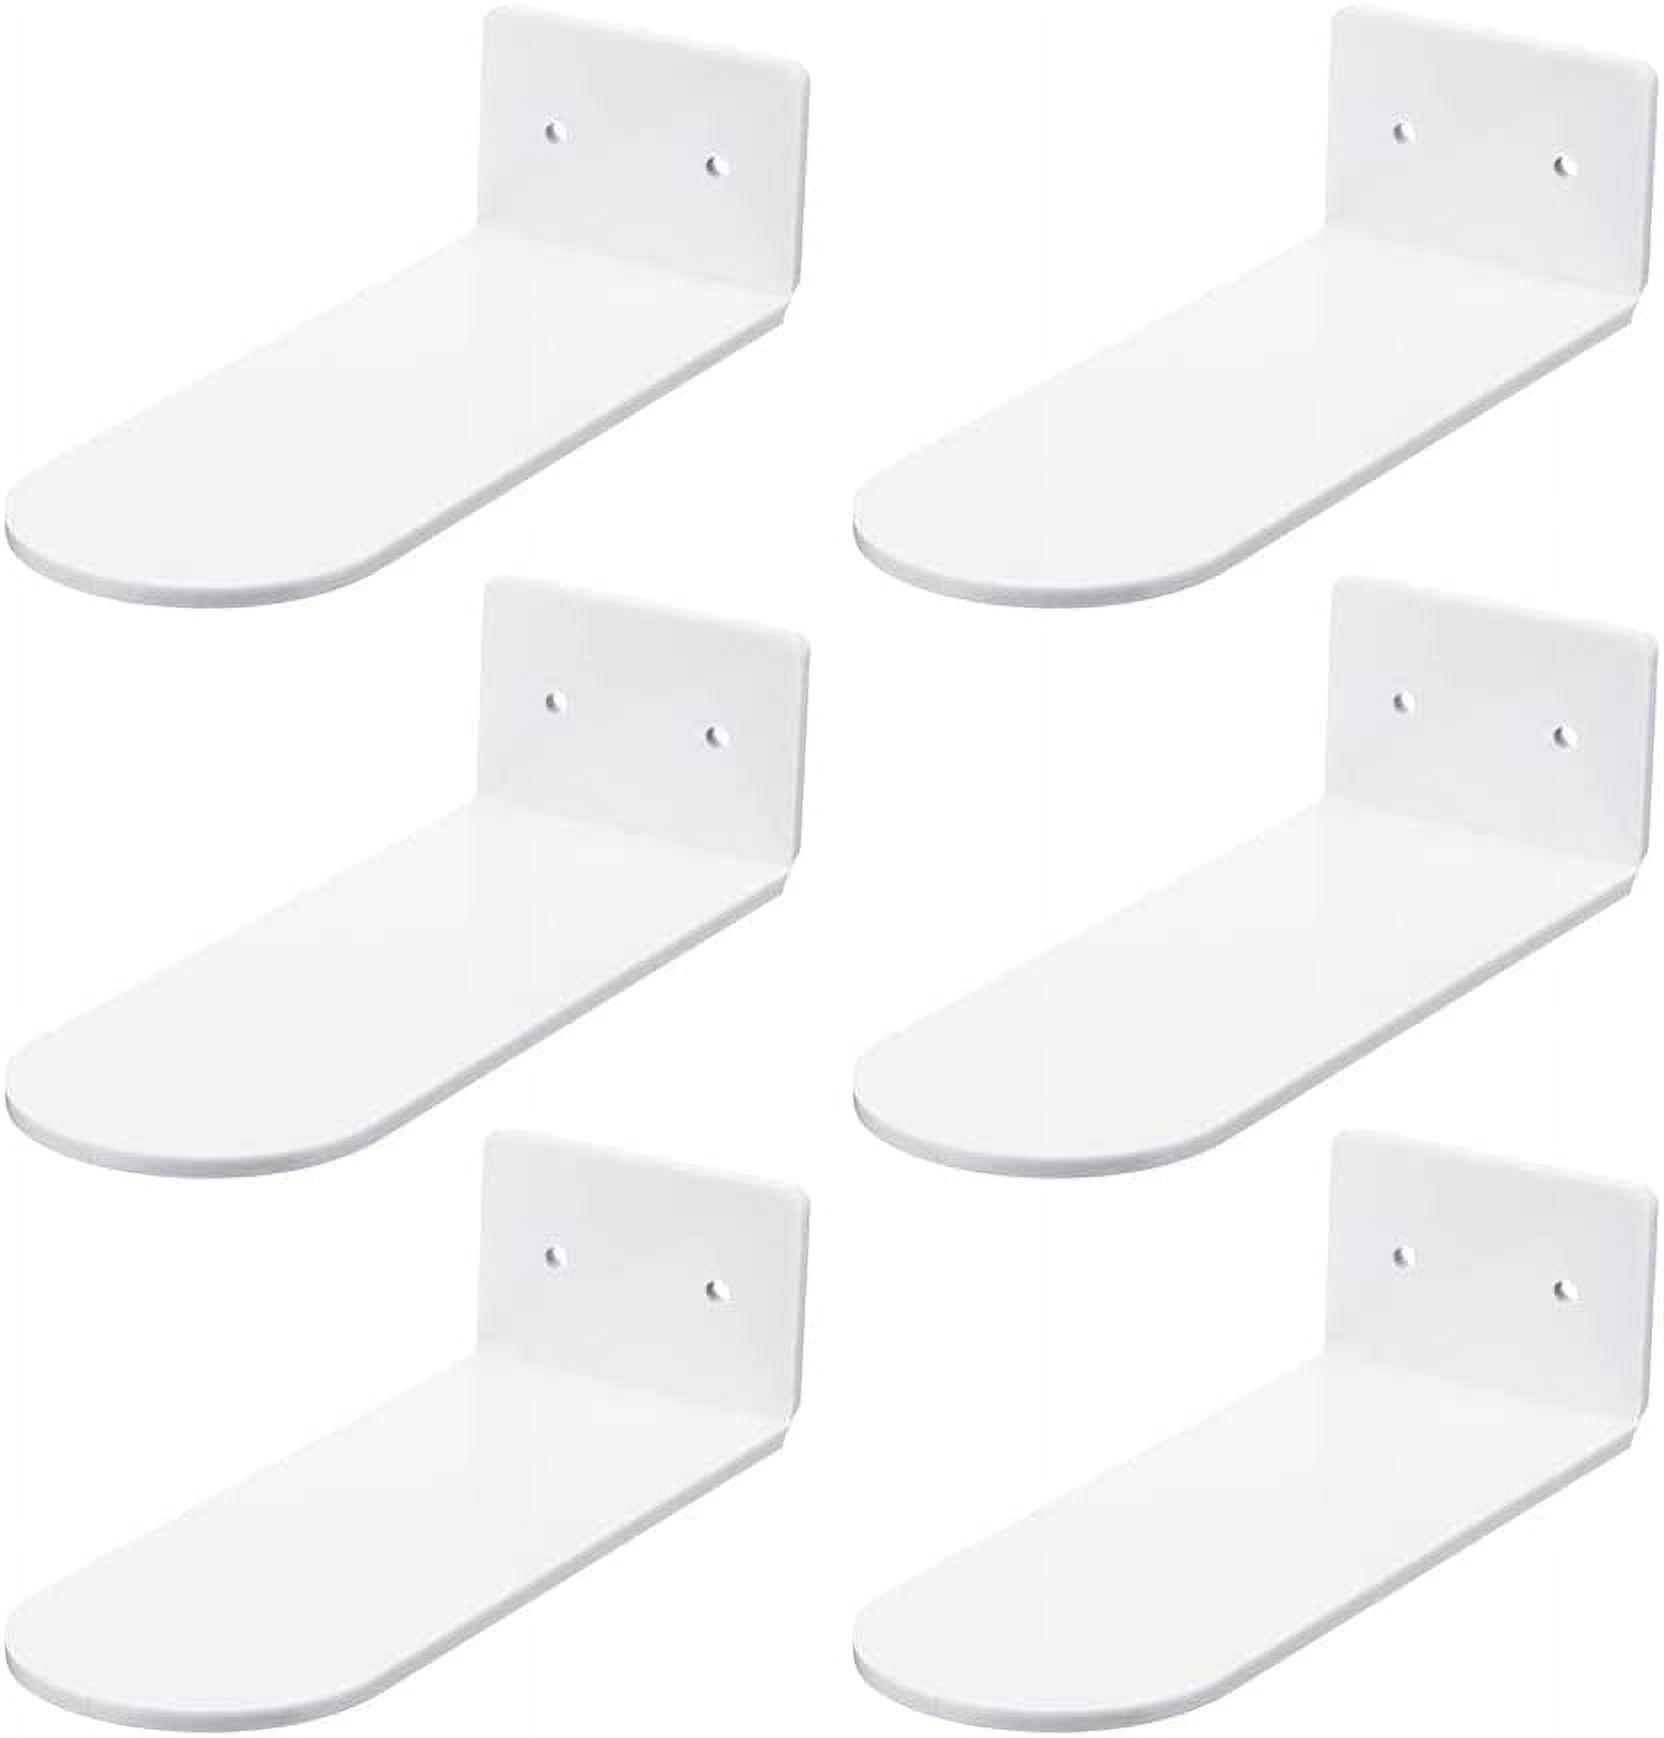 LoengMax 6 Pack Acrylic Floating Shoe Display Shelves, Clear Acrylic  Floating Shelves for Showcase Sneaker Collection or Shoes Box, Levitating  Shoe